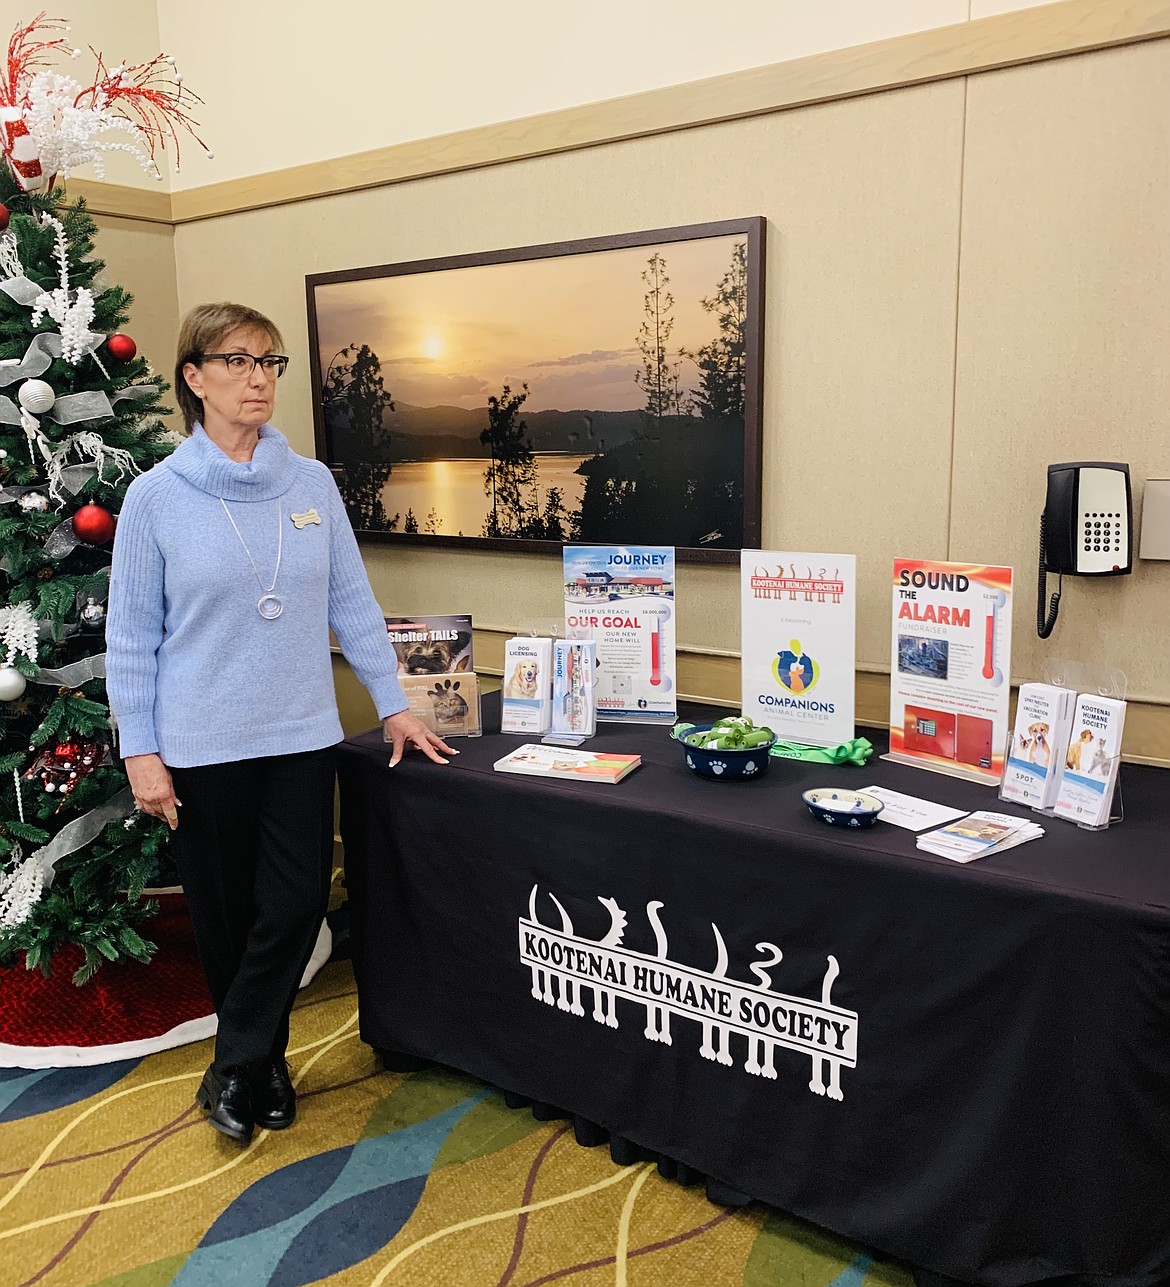 Vicky Nelson with the Companions Animal Center, formerly Kootenai Humane Society, at the December Networking, Breakfast & Connections Christmas Party.